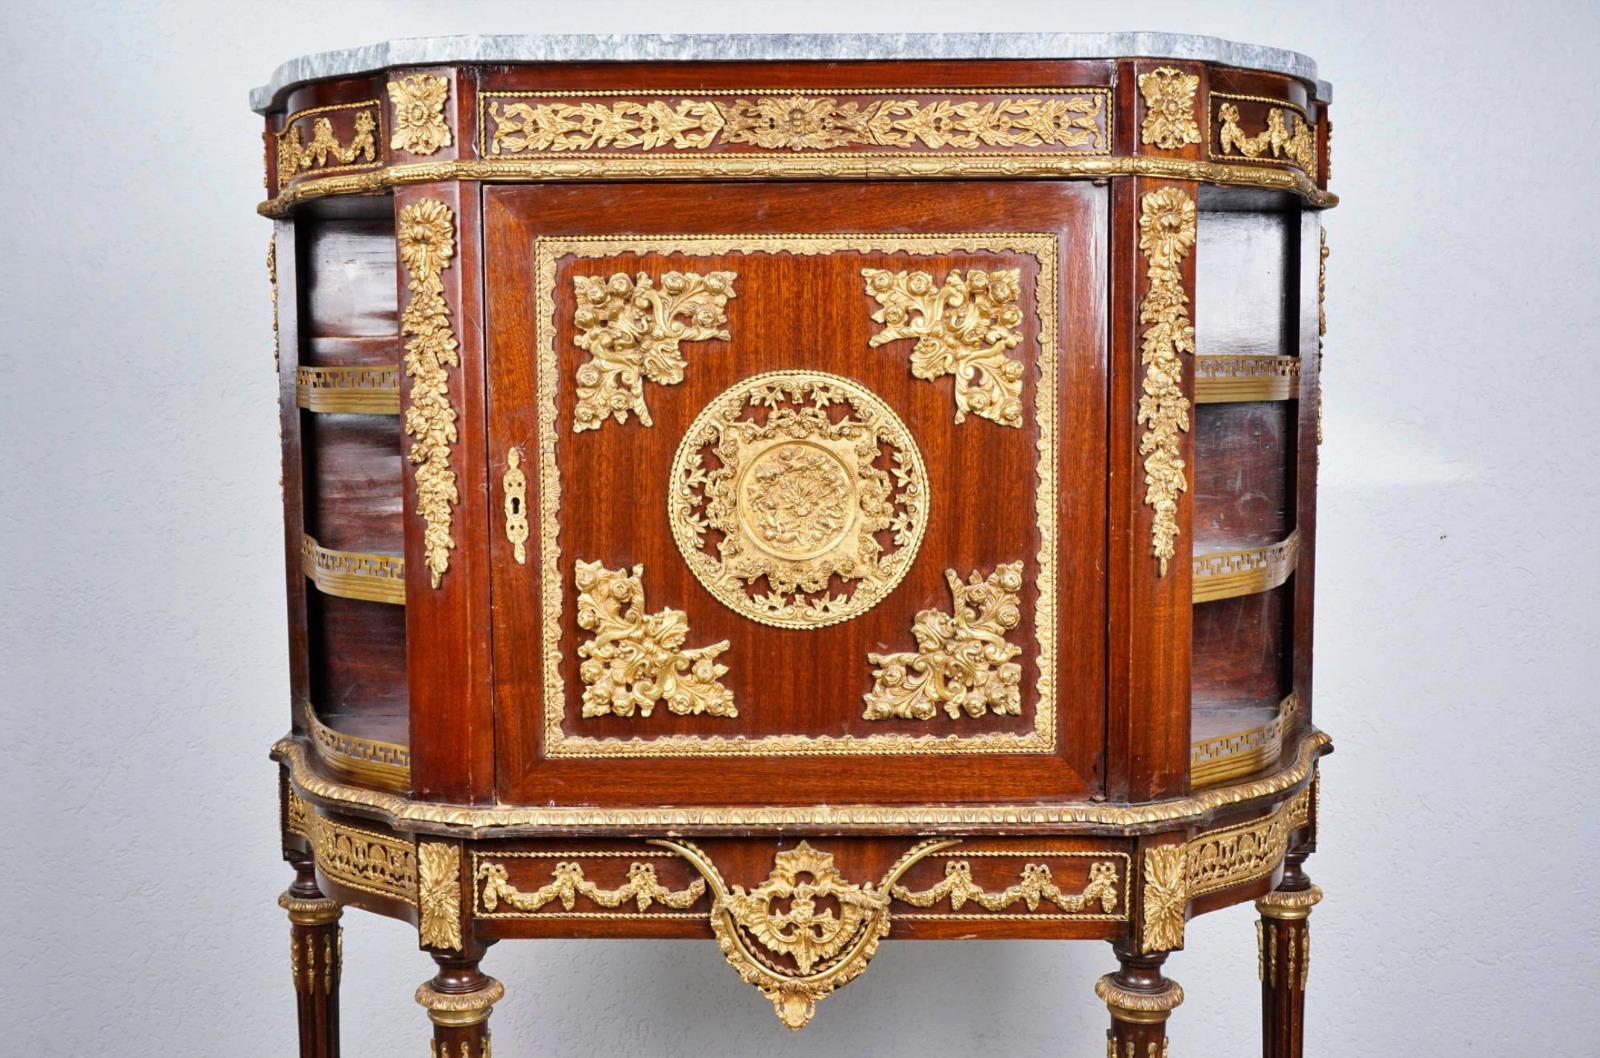 Cabinet / buffet France 19th century Napoleon III

mahogany veneer, gilded bronze appliqués, rich flower and leaf decoration with girlade and rosettes, central large medallion with cherub scenery, laterally with 3 compartments each, body hollow,